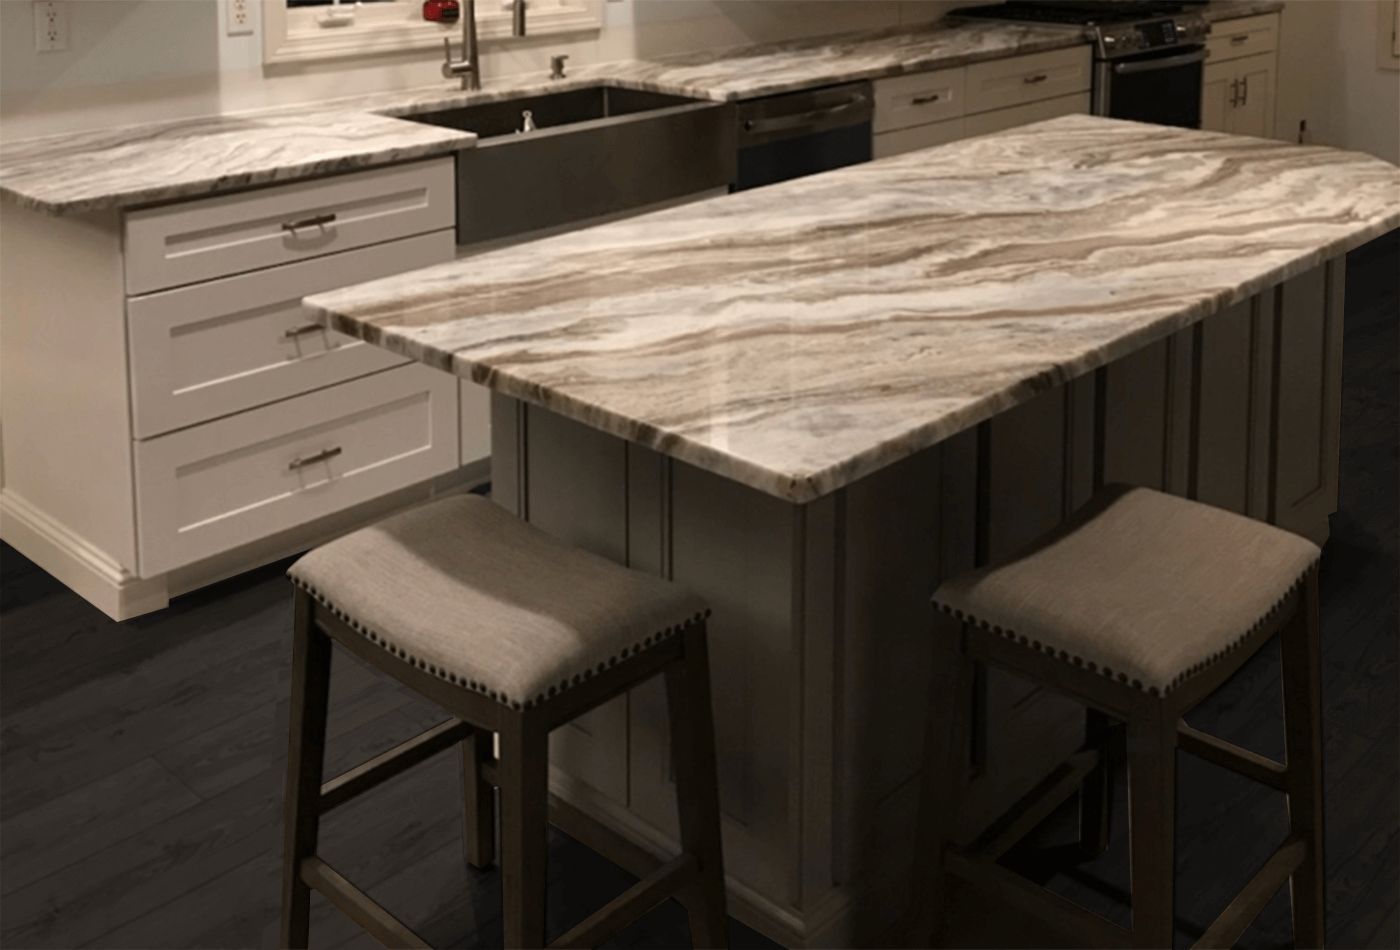 Should kitchen countertops be lighter in colour than the floor